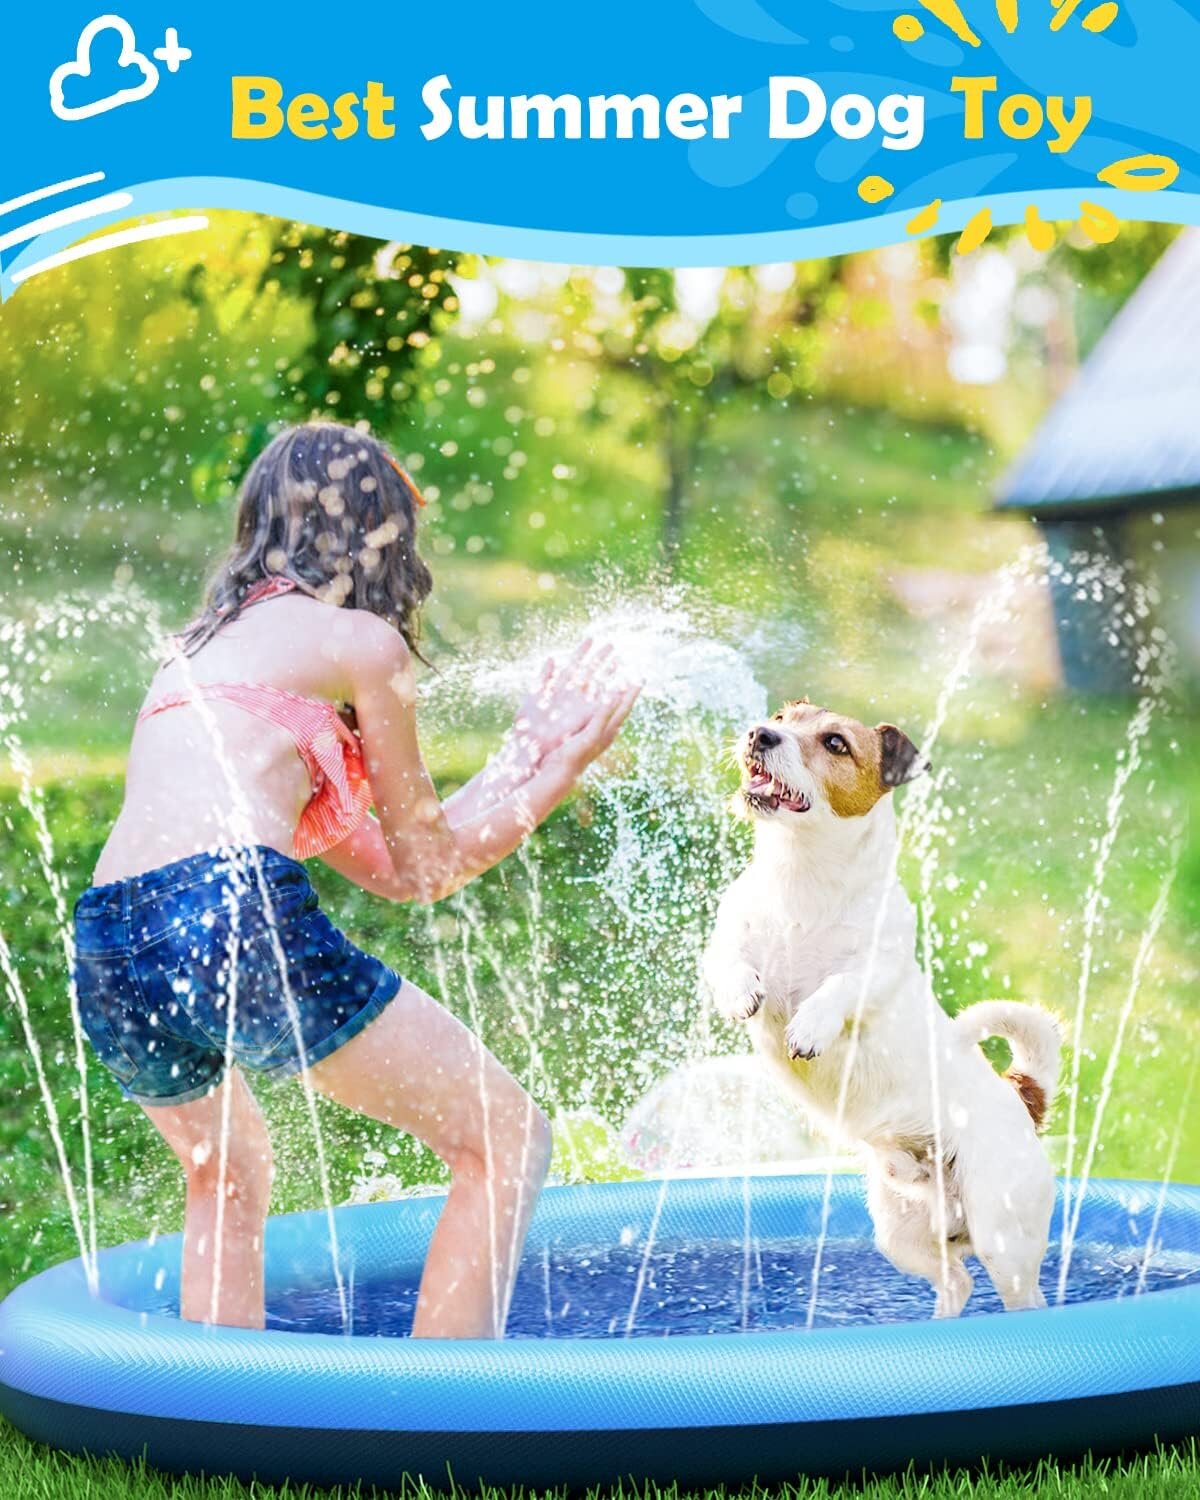 Non-slip surface for safe playtime for kids and pets